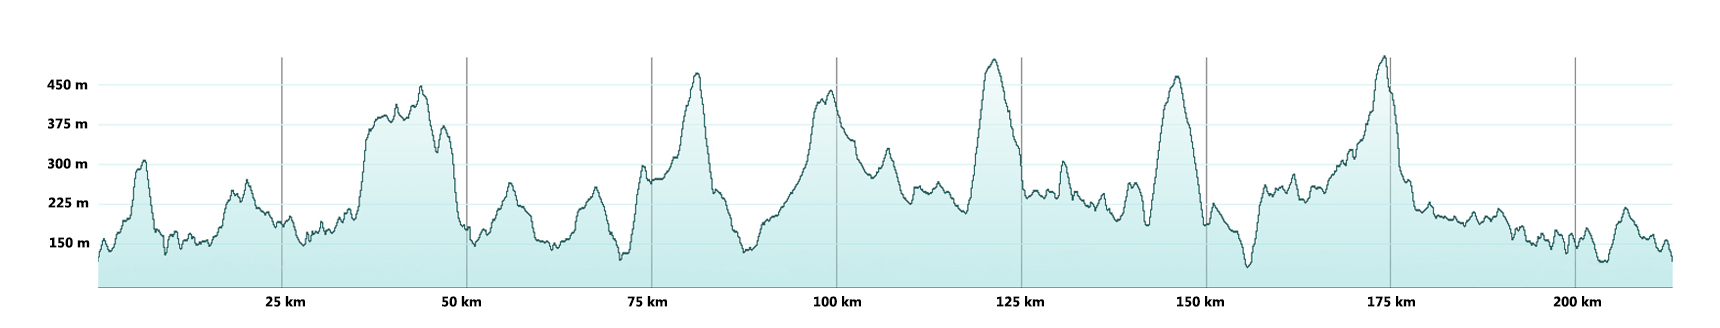 Dales Cycleway Route Profile